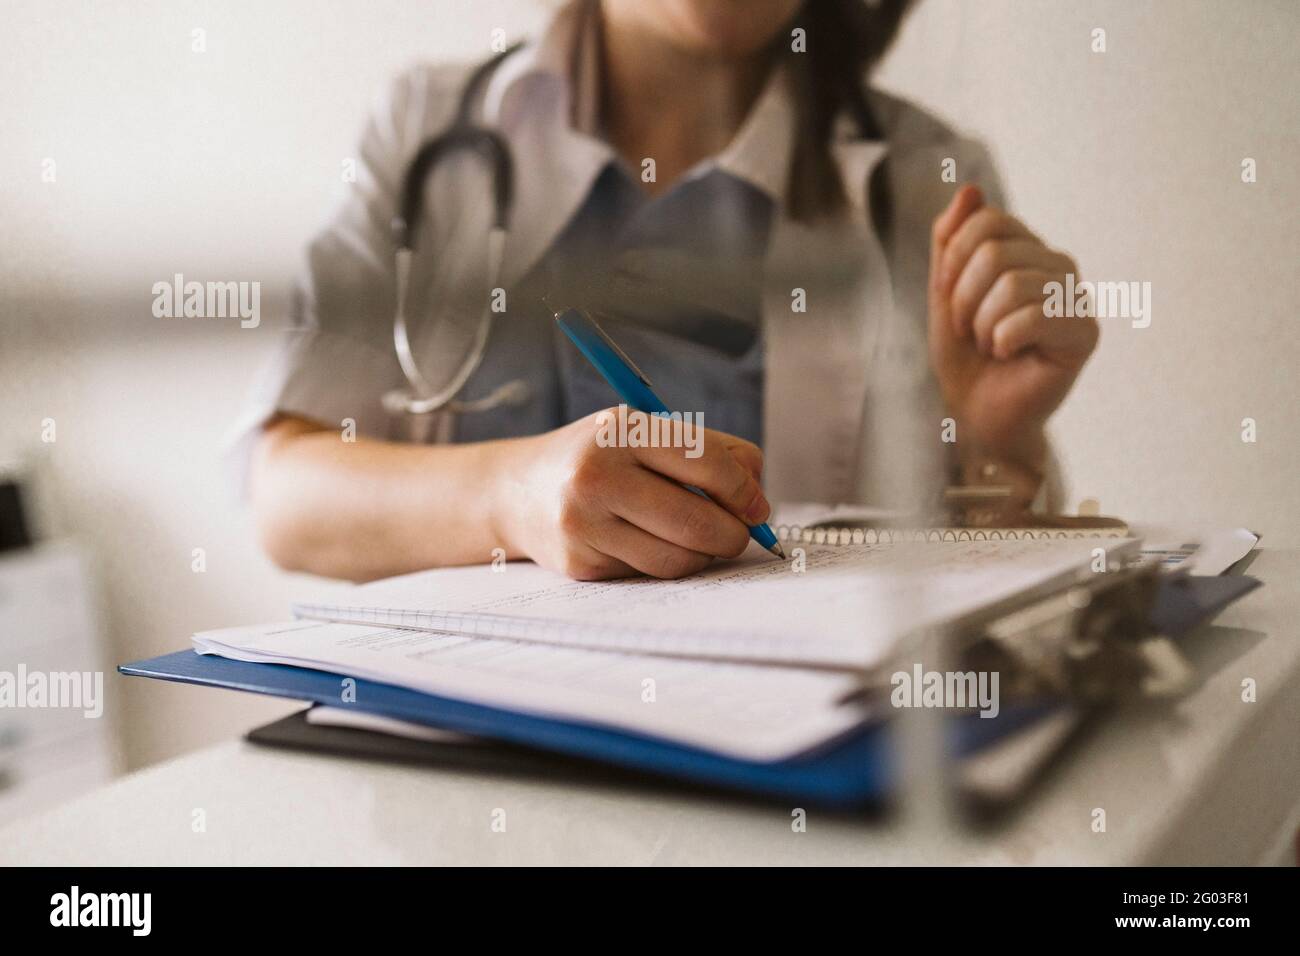 Midsection of female healthcare worker writing prescription Stock Photo